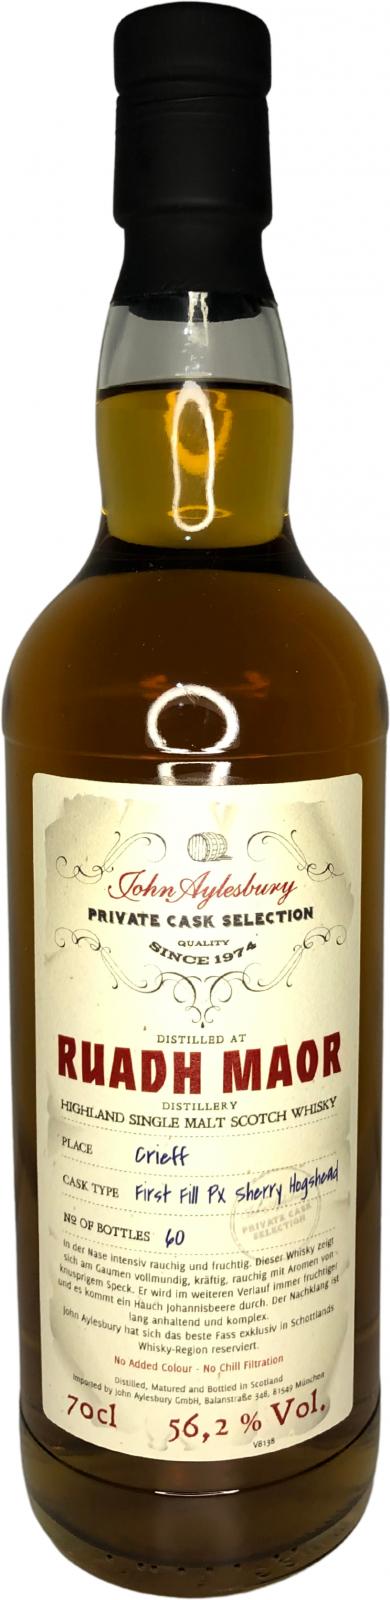 Ruadh Maor Private Cask Selection JAy First Fill PX Sherry Hogshead 56.2% 700ml